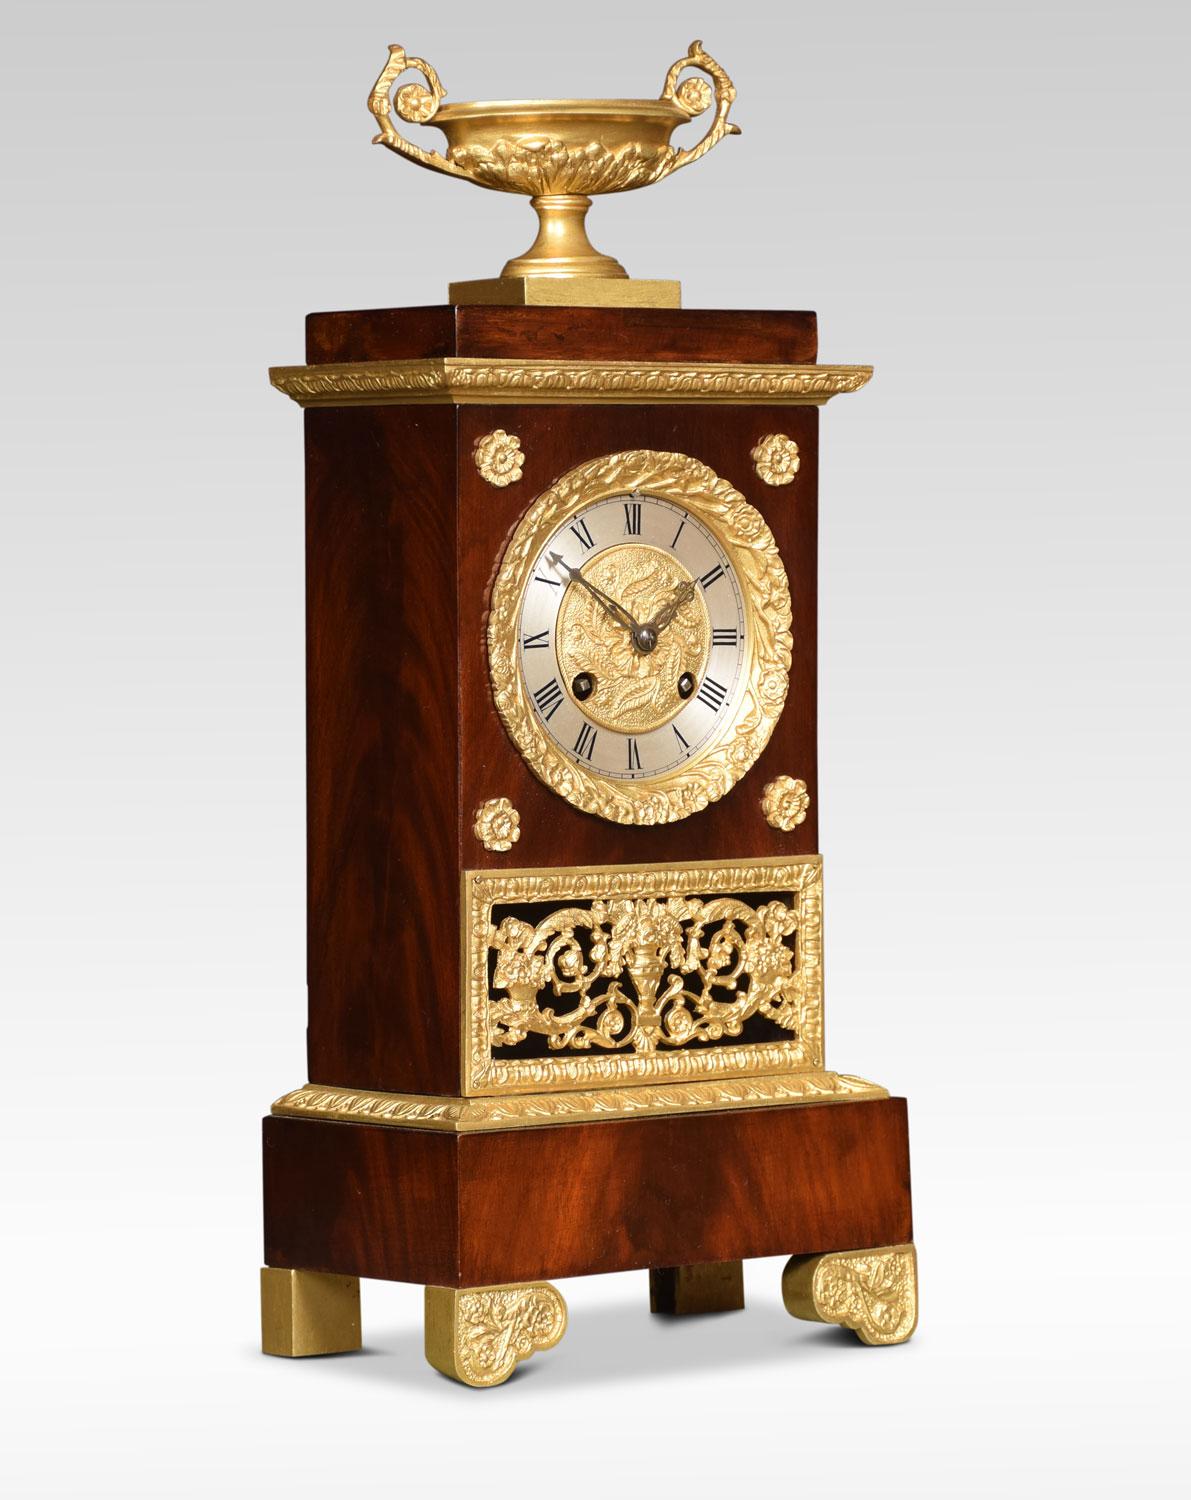 French Empire style gilt metal clock, the gilt metal mounted urn above figured mahogany case having fret cast grille below and scrolling toes. The silvered dial with Roman numerals striking on bell.
Dimensions:
Height 16 inches
Width 6.5